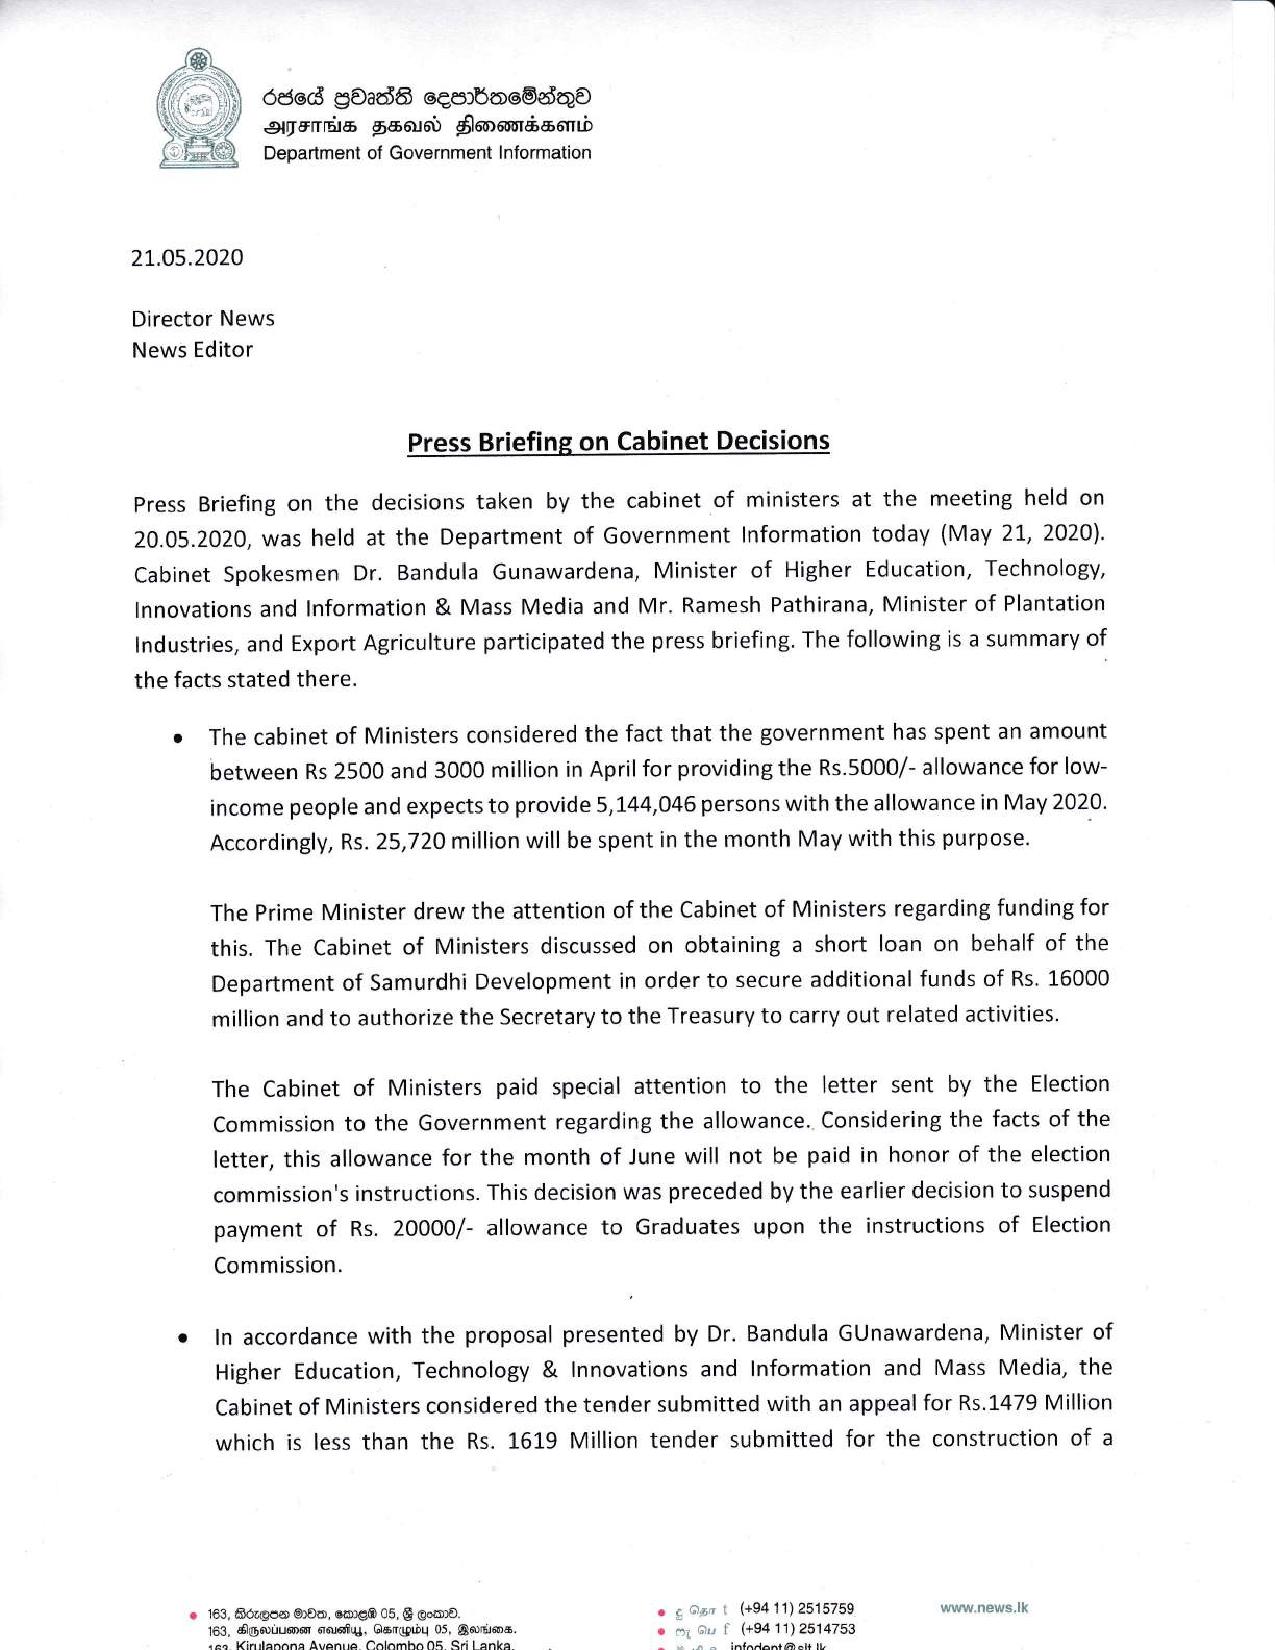 Cabinet Decisions 20.05.2020English compressed page 001